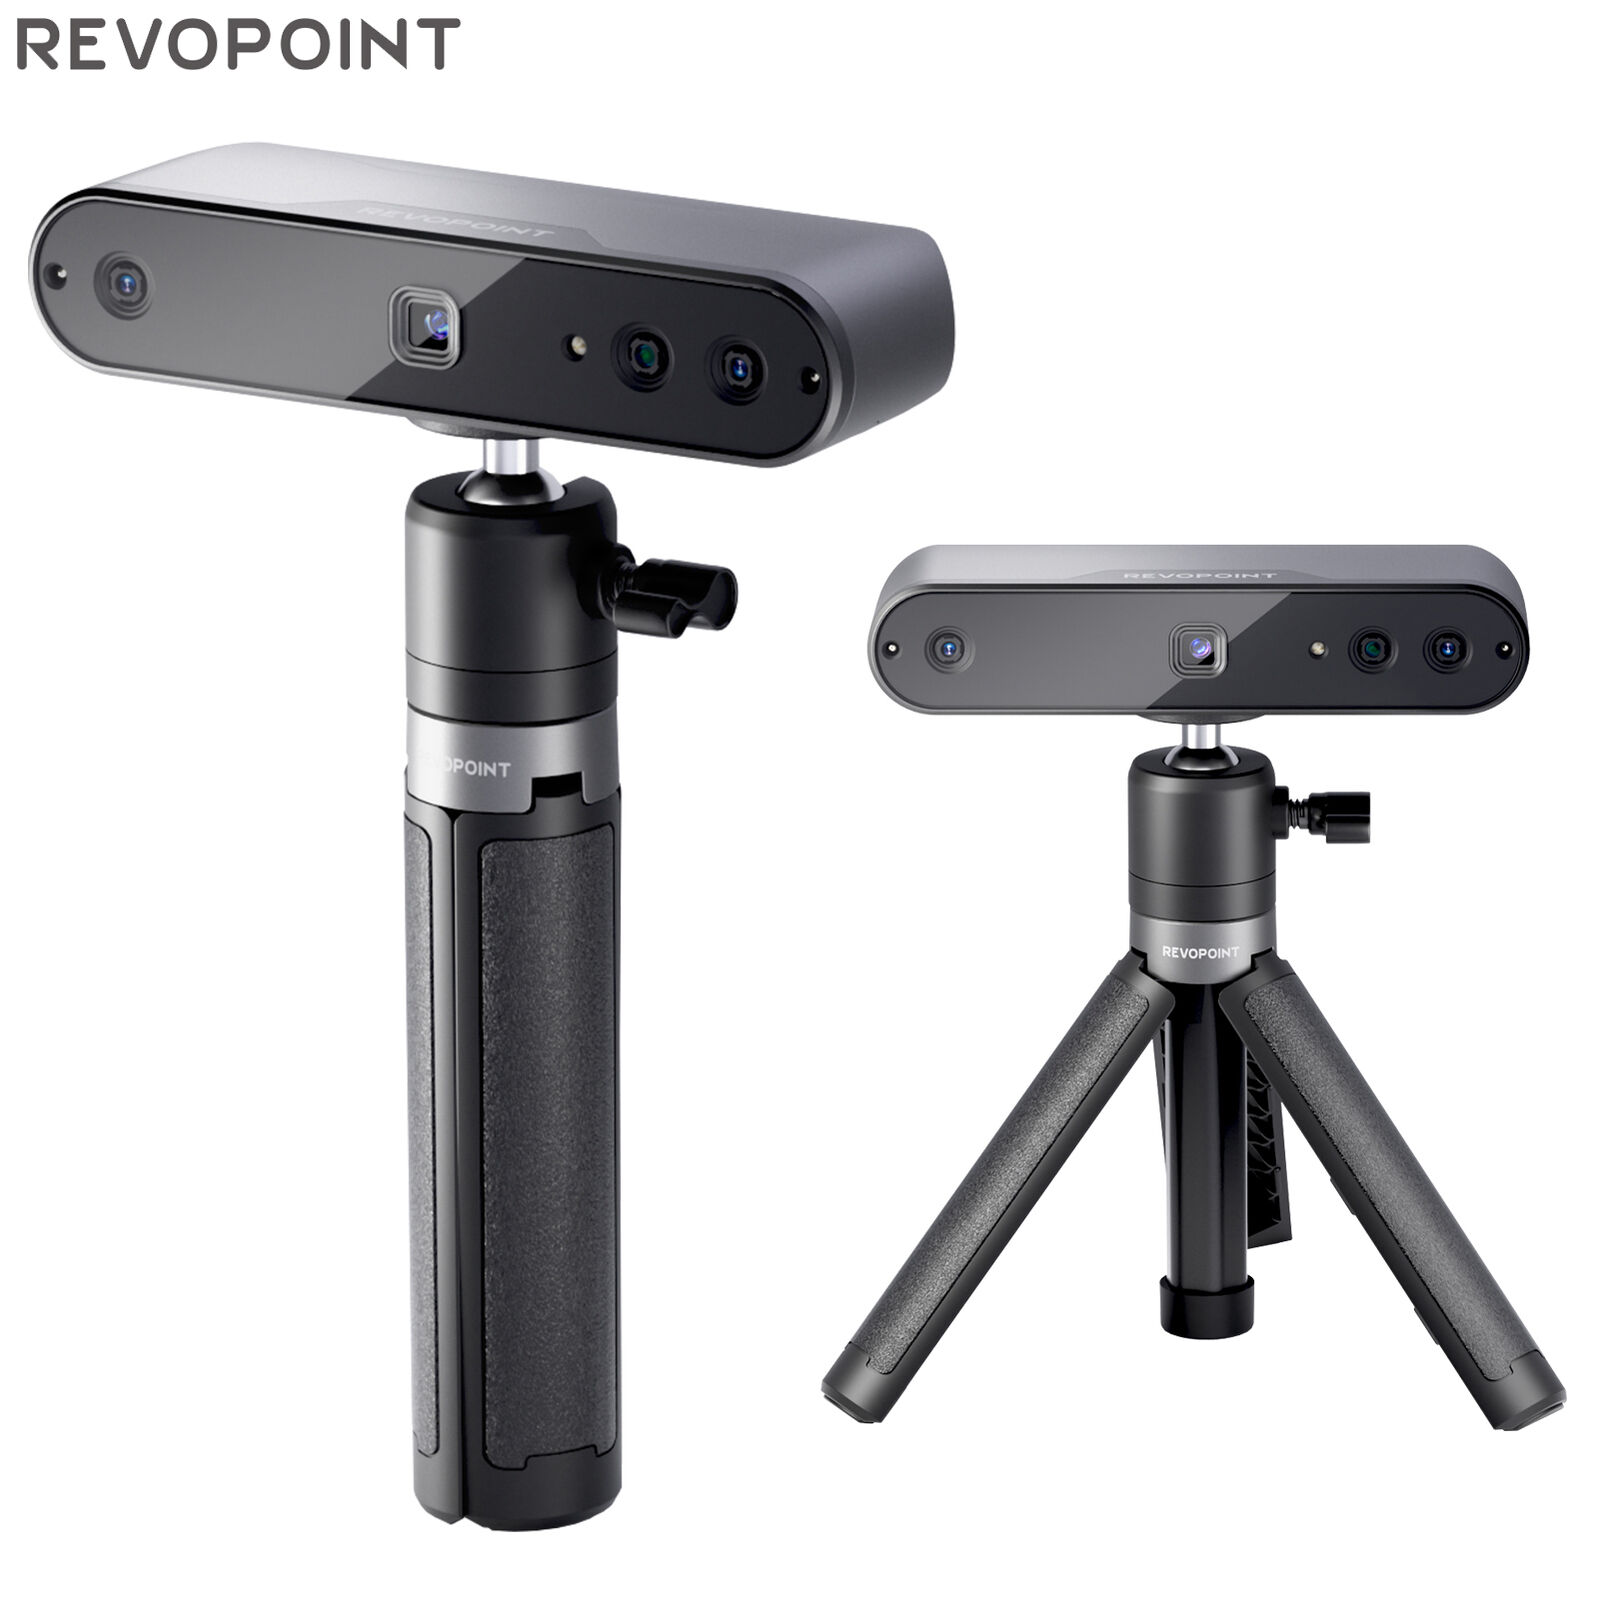 Revopoint INSPIRE 3D Scanner 0.2mm Precision with Class 1 Infrared Light E4T4